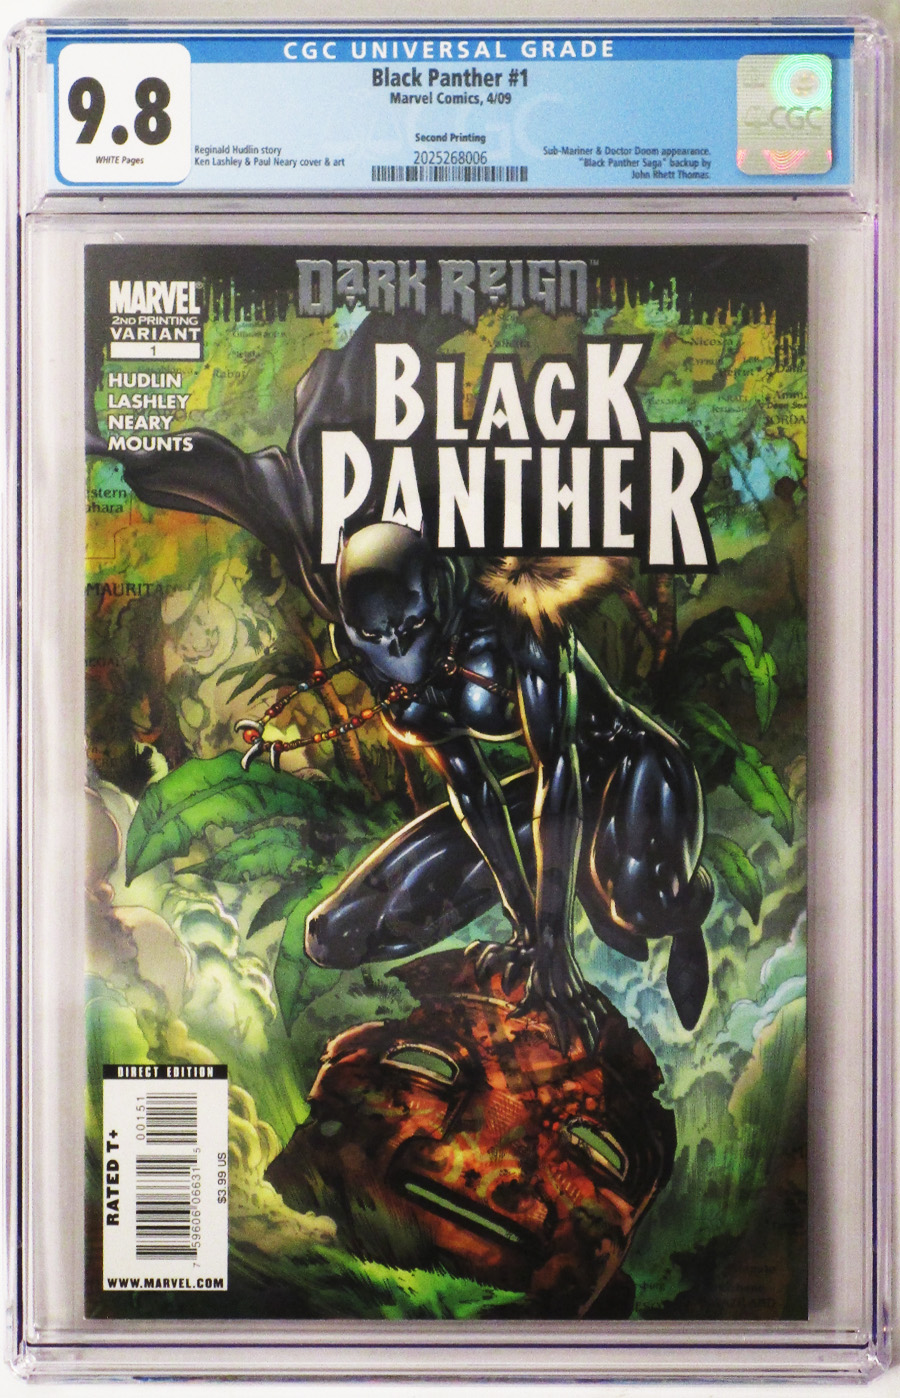 Black Panther Vol 5 #1 Cover F CGC 9.8 2nd Ptg Ken Lashley Variant Cover (Dark Reign Tie-In)